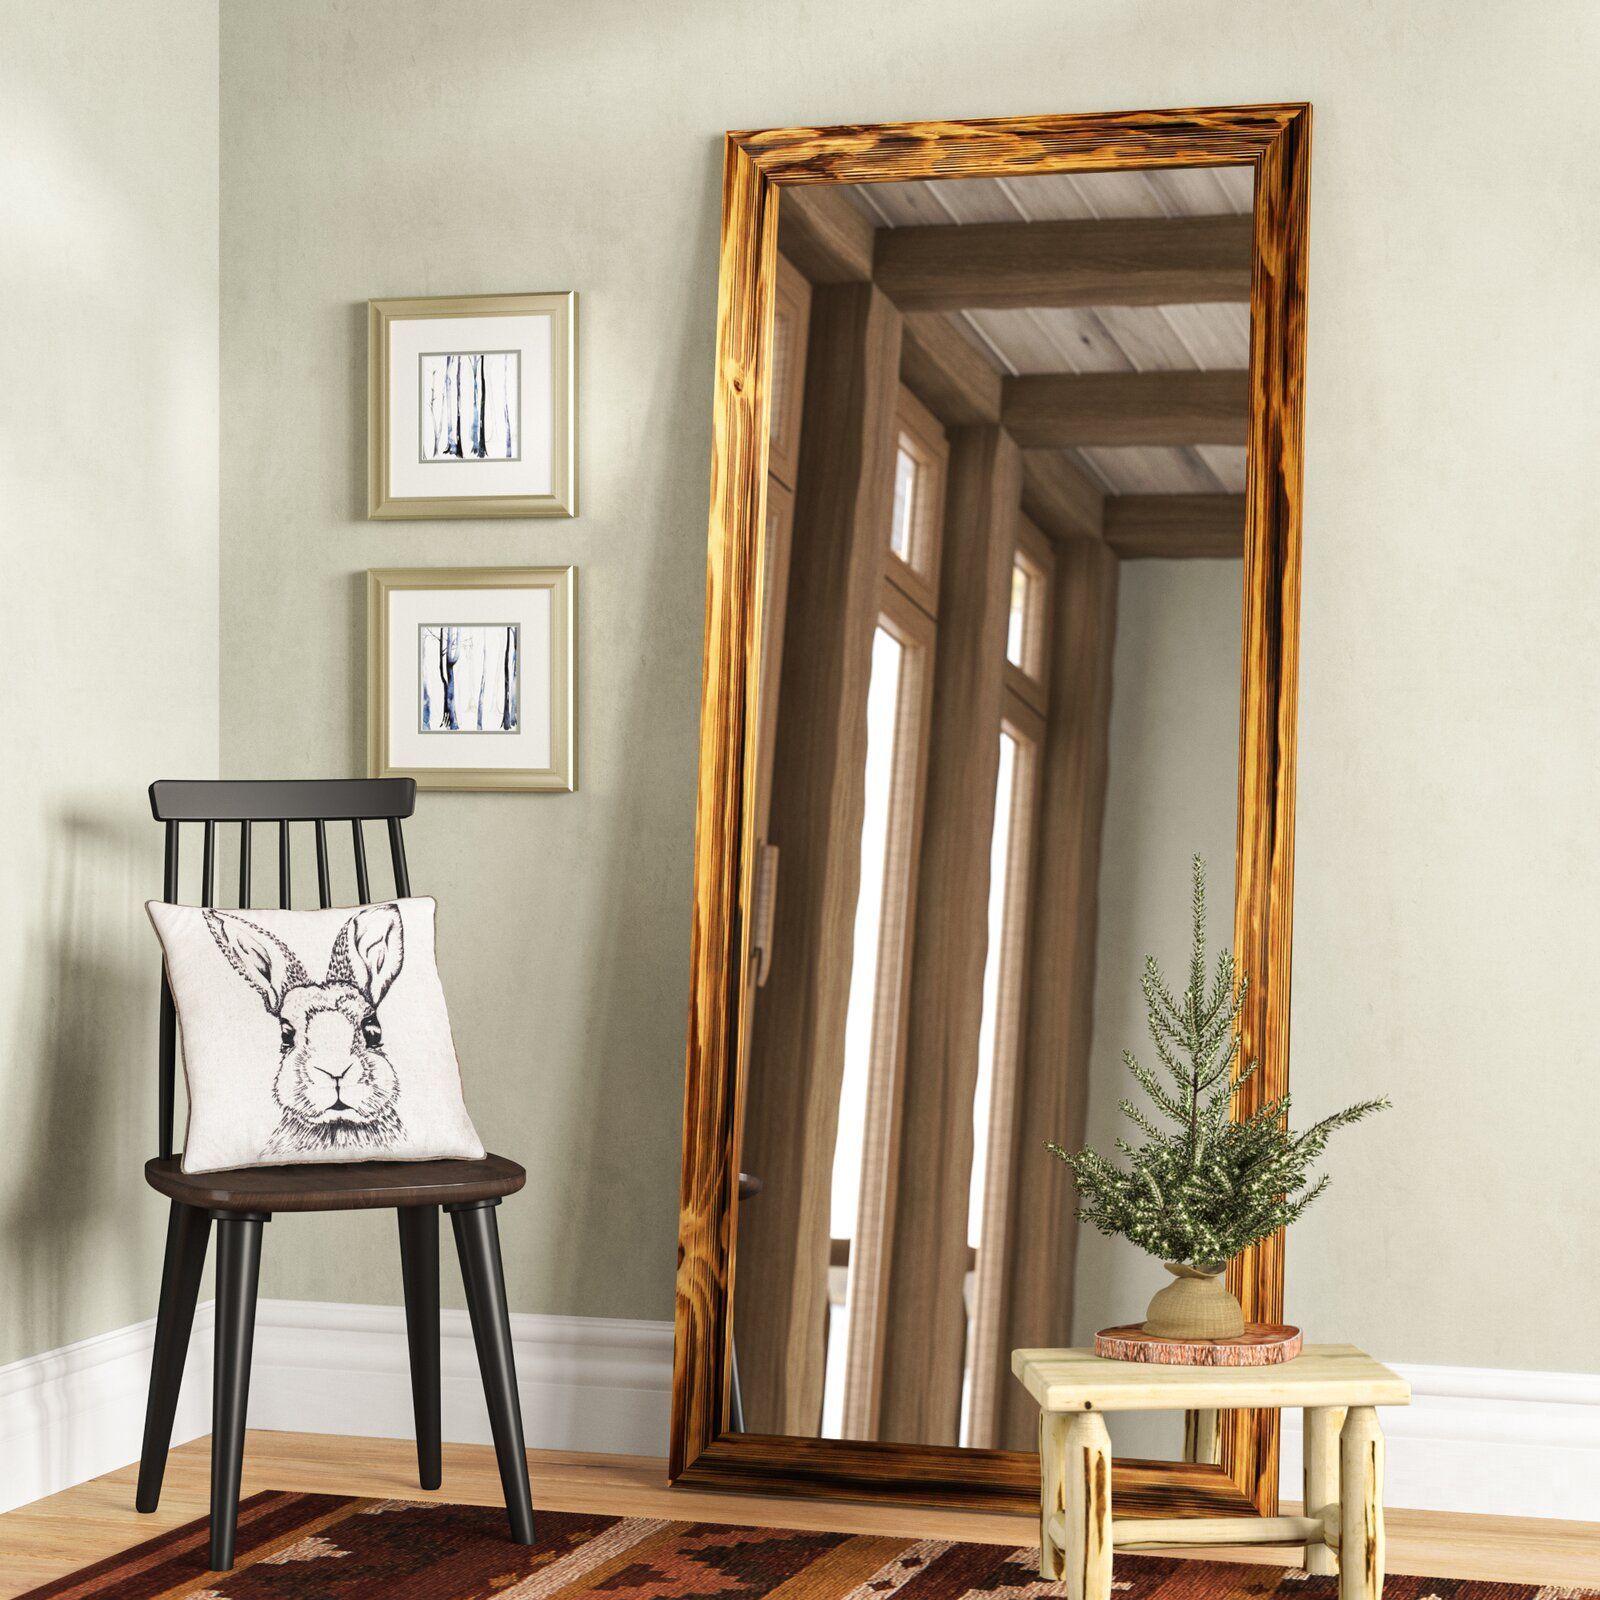 Cairo Platinum Gold Decorative Wall Mirror | Rustic Full Length Mirror For Reba Accent Wall Mirrors (View 4 of 15)